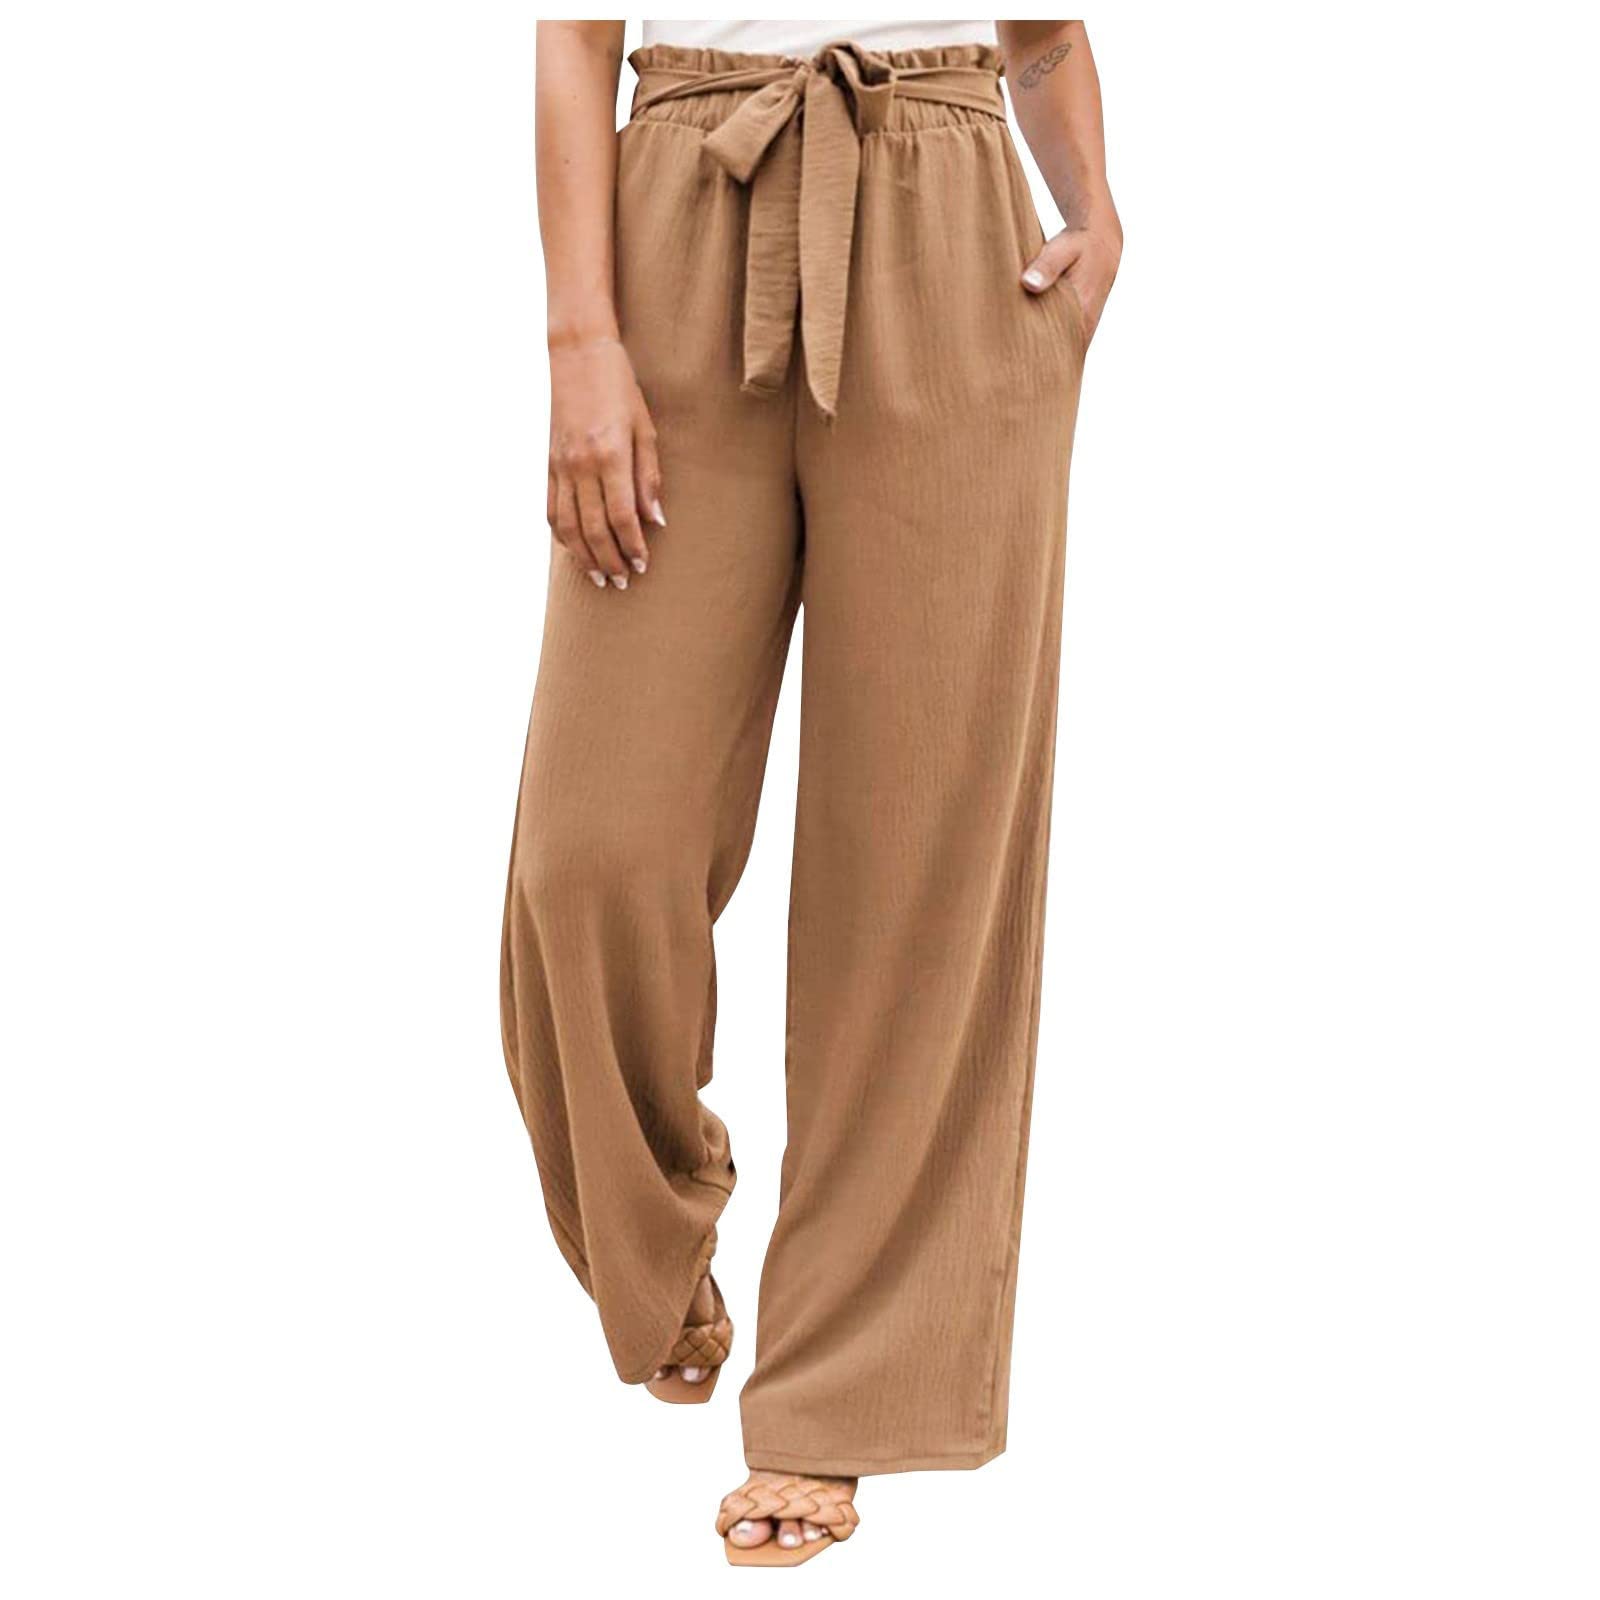 Women's Cotton Linen Pants High Waisted Palazzo Pants Wide Leg Casual  Elasticity Trousers Loose Sweatpants with Pocket(Apricot) at Amazon Women's  Clothing store